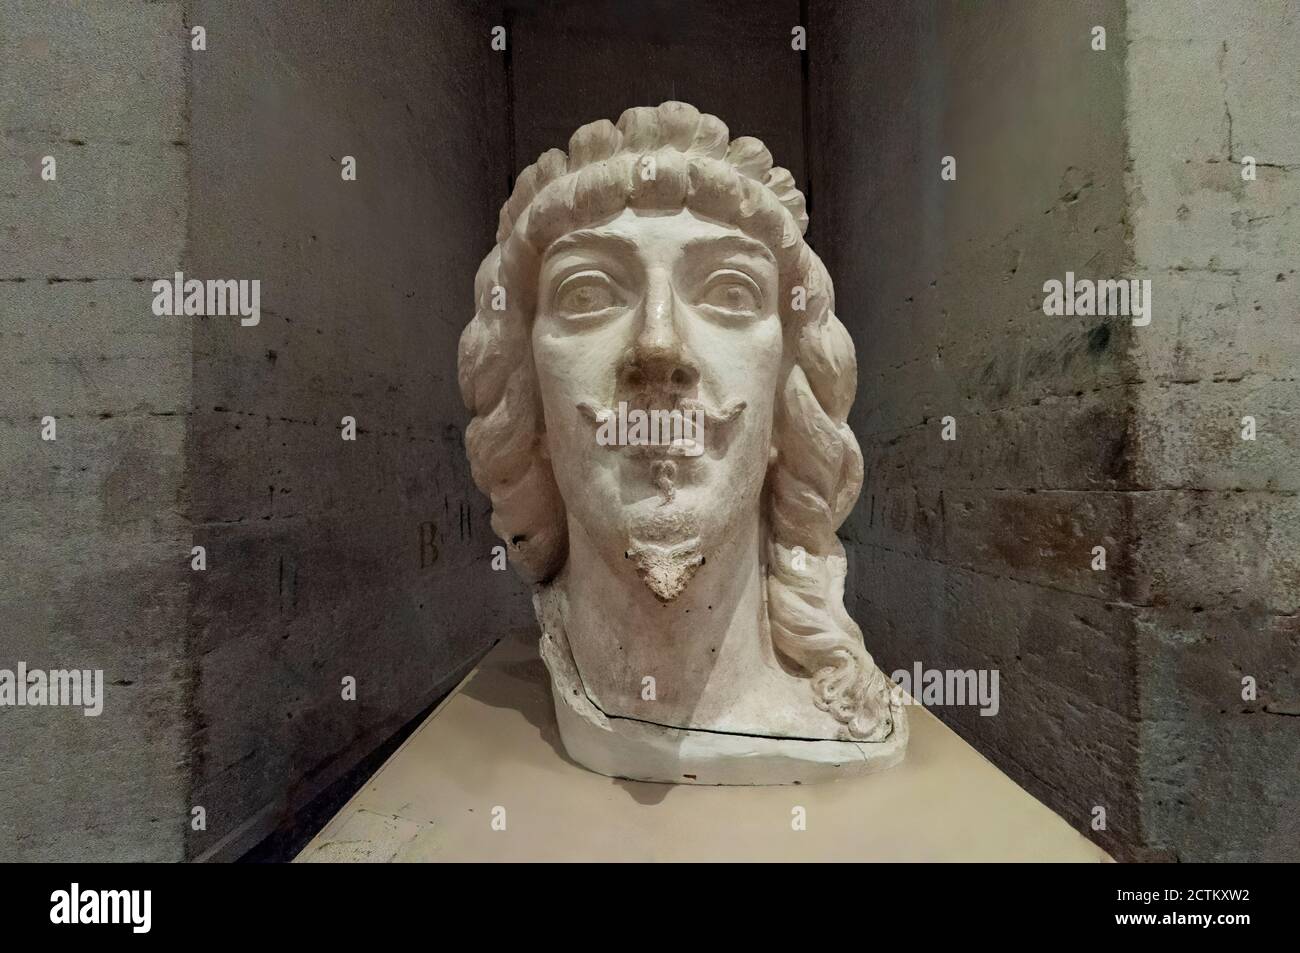 Blois, France - November 02, 2013: Head of the bust of Gaston d'Orléans, Duke of Orleans, the third son of King Henry IV of France. Chateau de Blois. Stock Photo